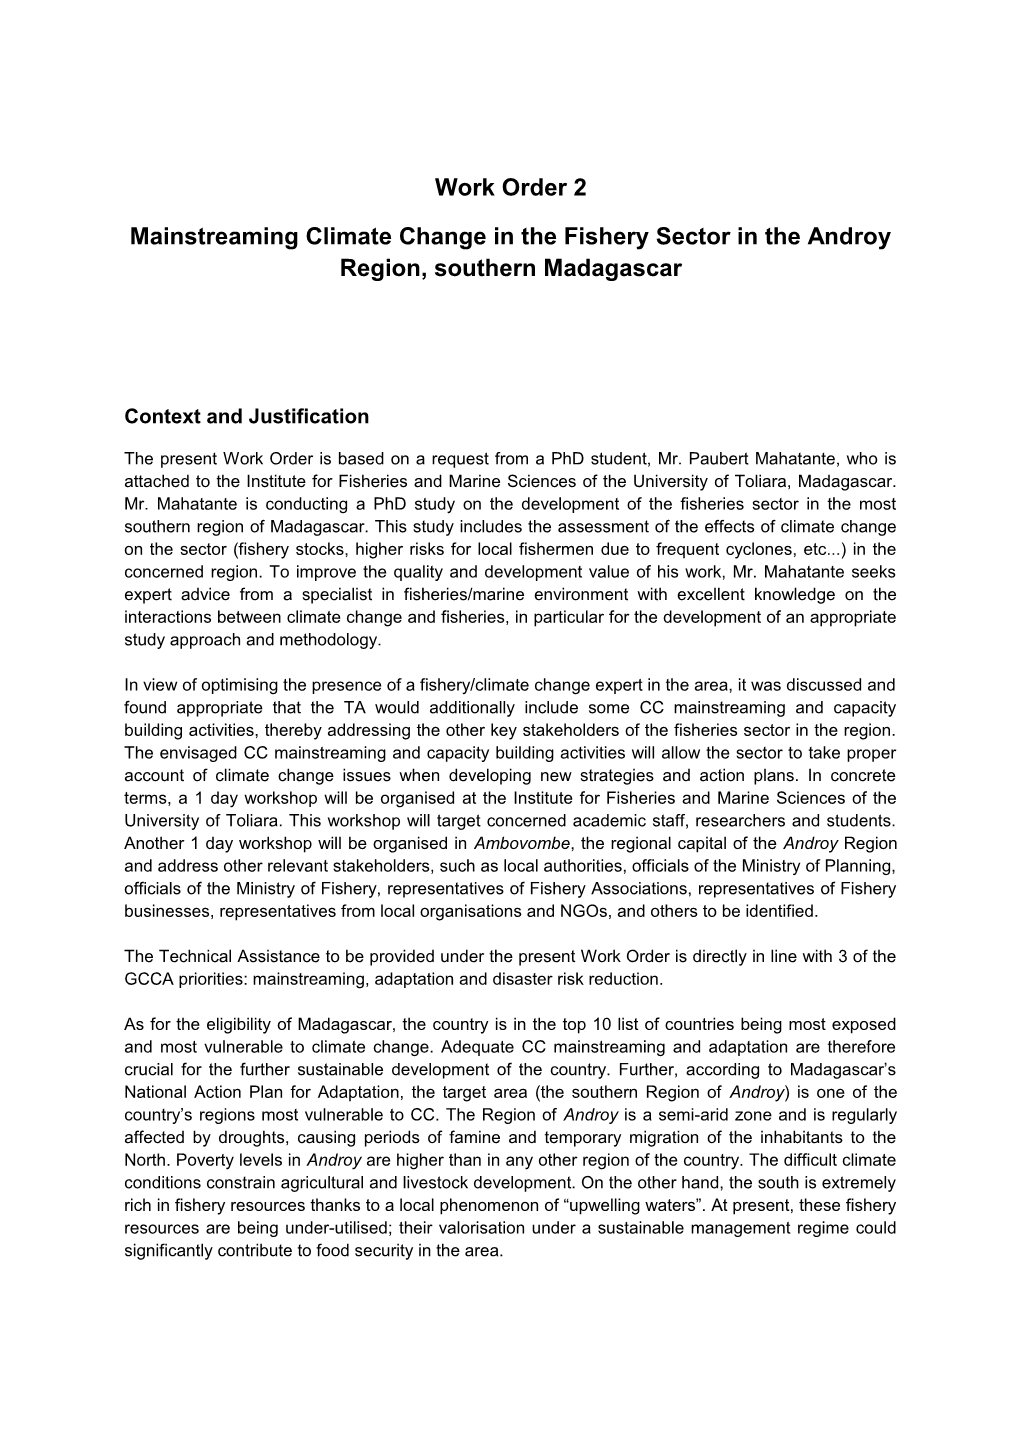 Mainstreaming Climate Change in the Fishery Sector in the Androy Region, Southern Madagascar